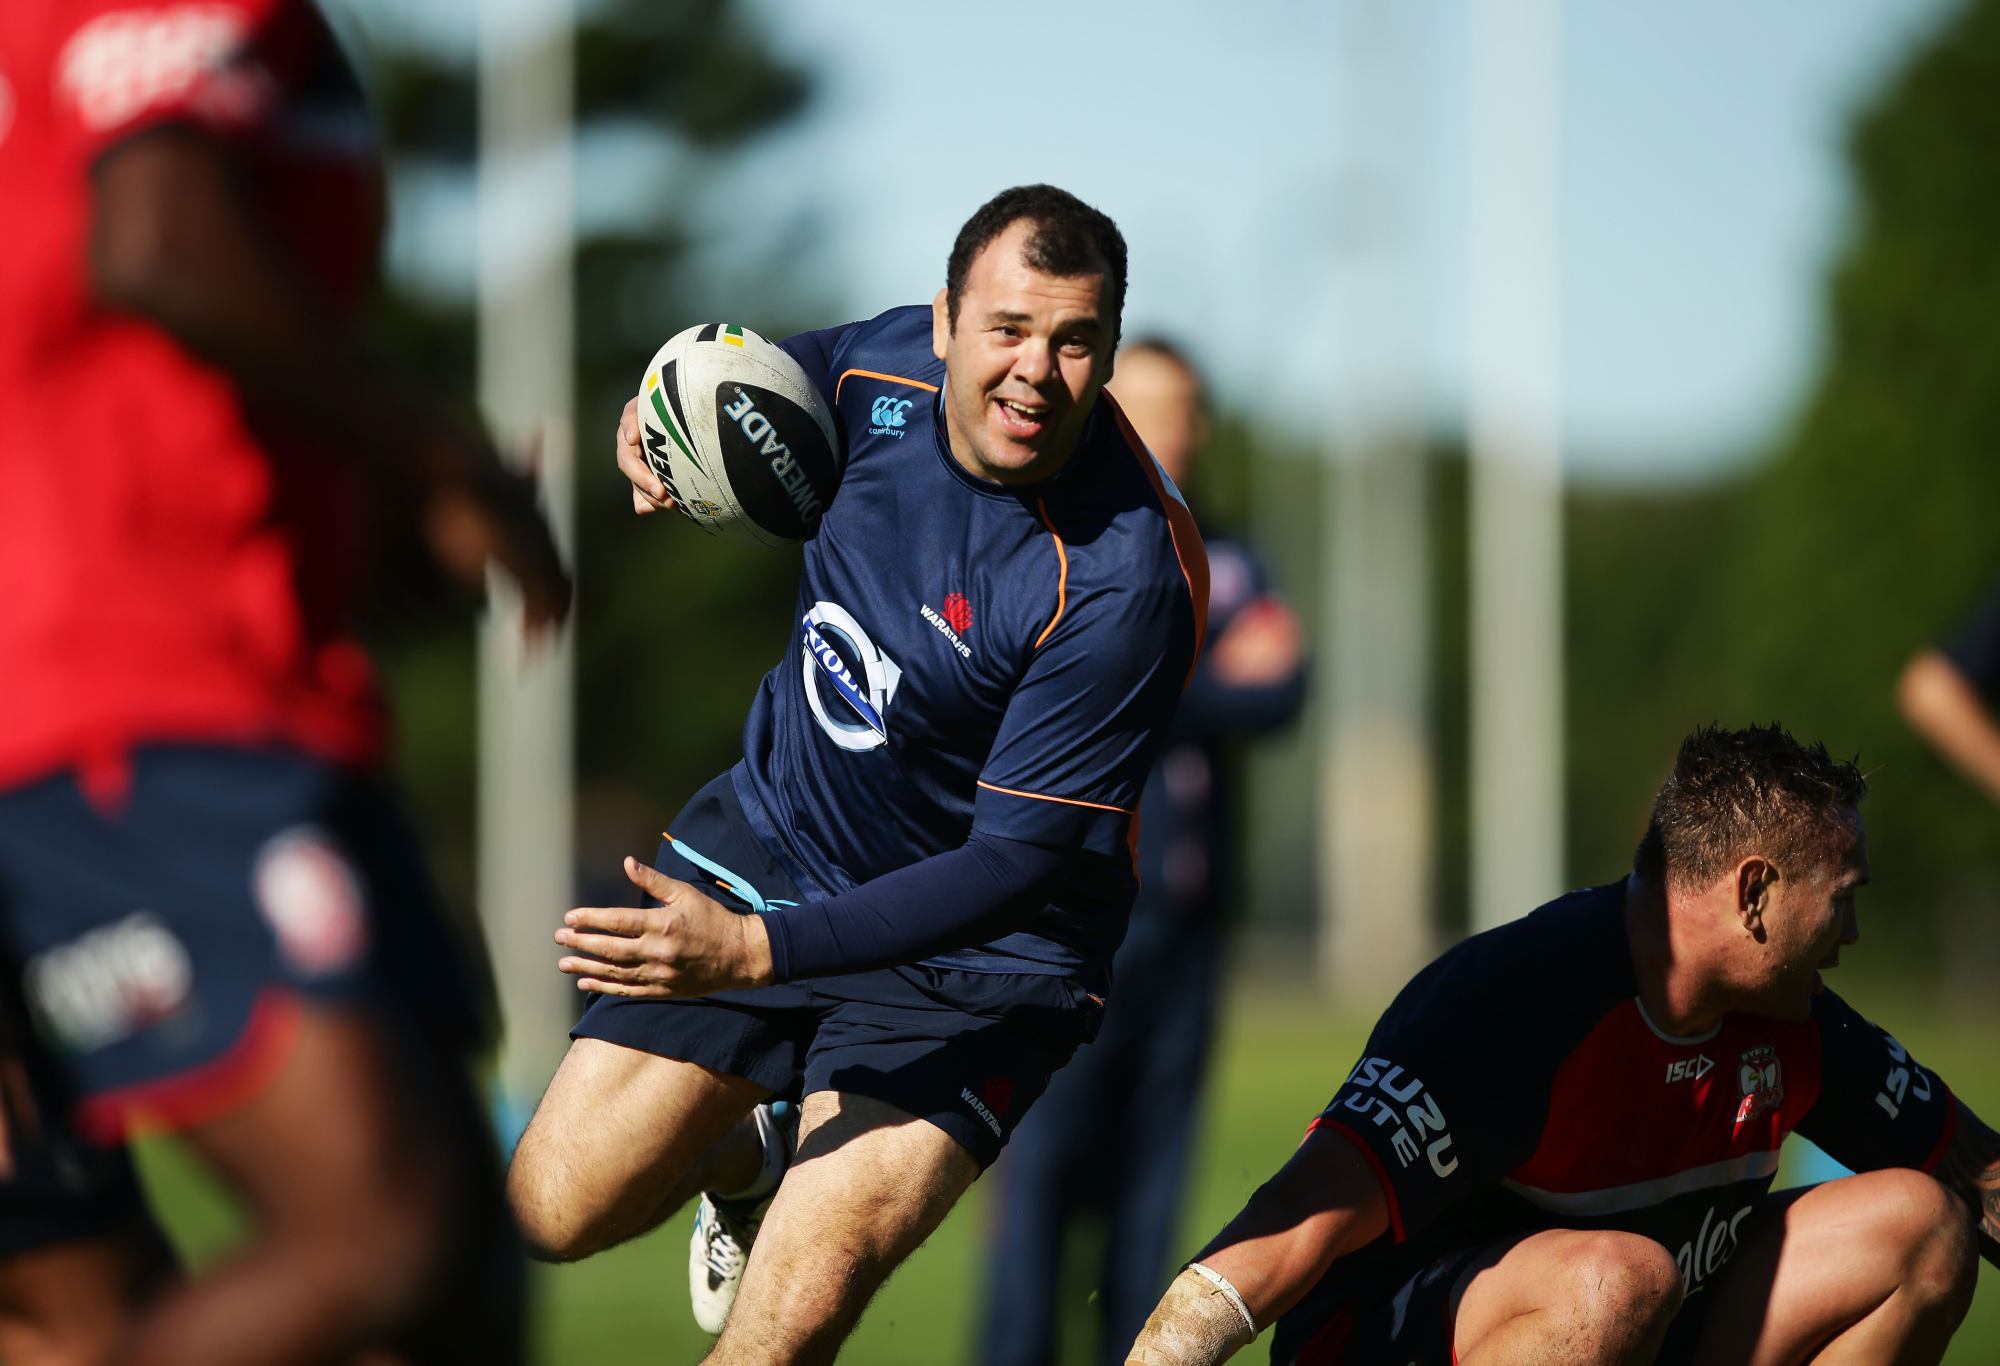 SYDNEY, AUSTRALIA - JUNE 17: Waratahs coach Michael Cheika takes part in a drill during a joint training session between the Waratahs and the Sydney Roosters at Kippax Lake on June 17, 2014 in Sydney, Australia. (Photo by Matt King/Getty Images)